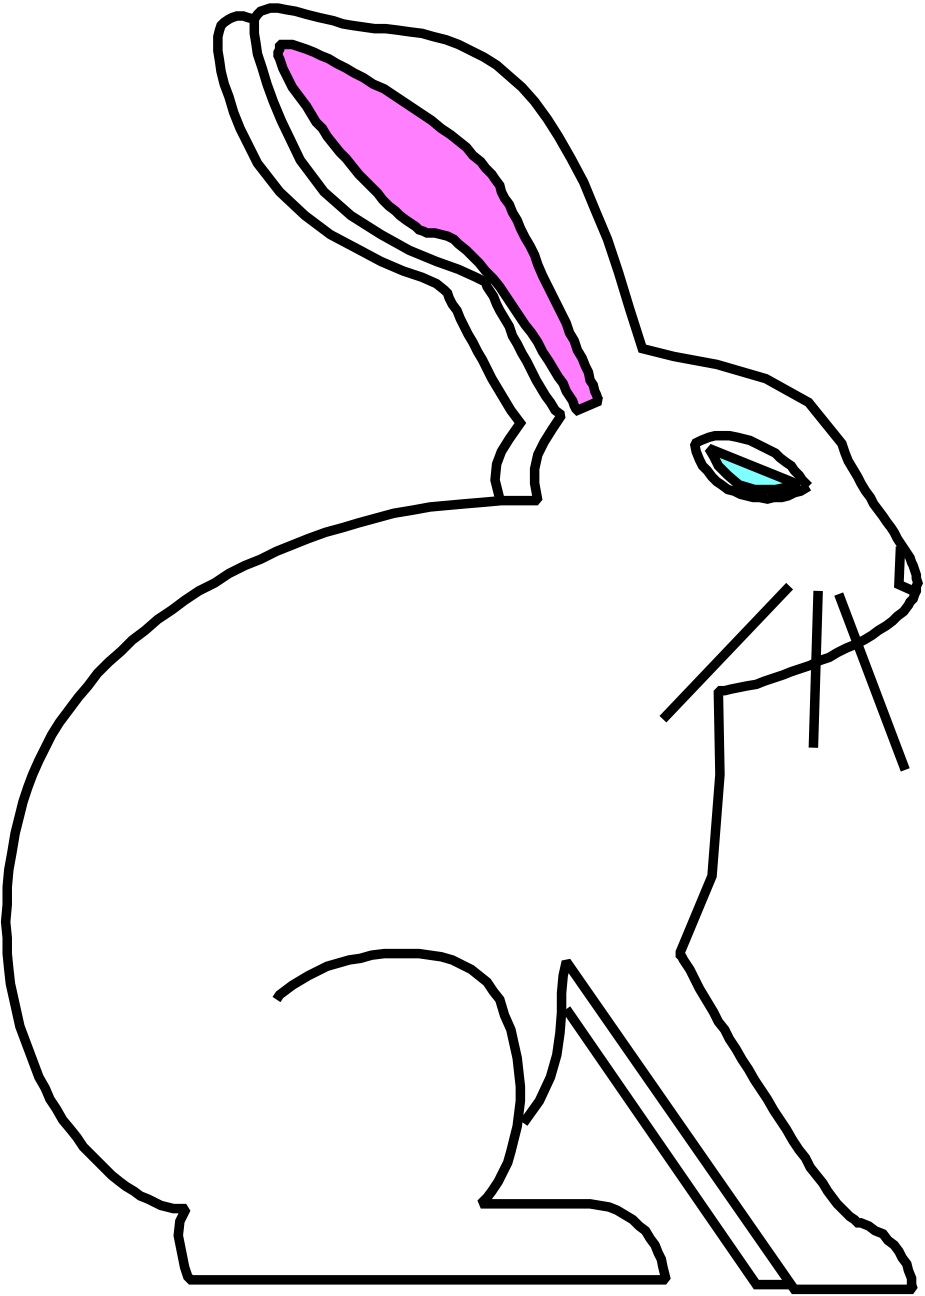 Rabbit Cartoon Images - Clipart library